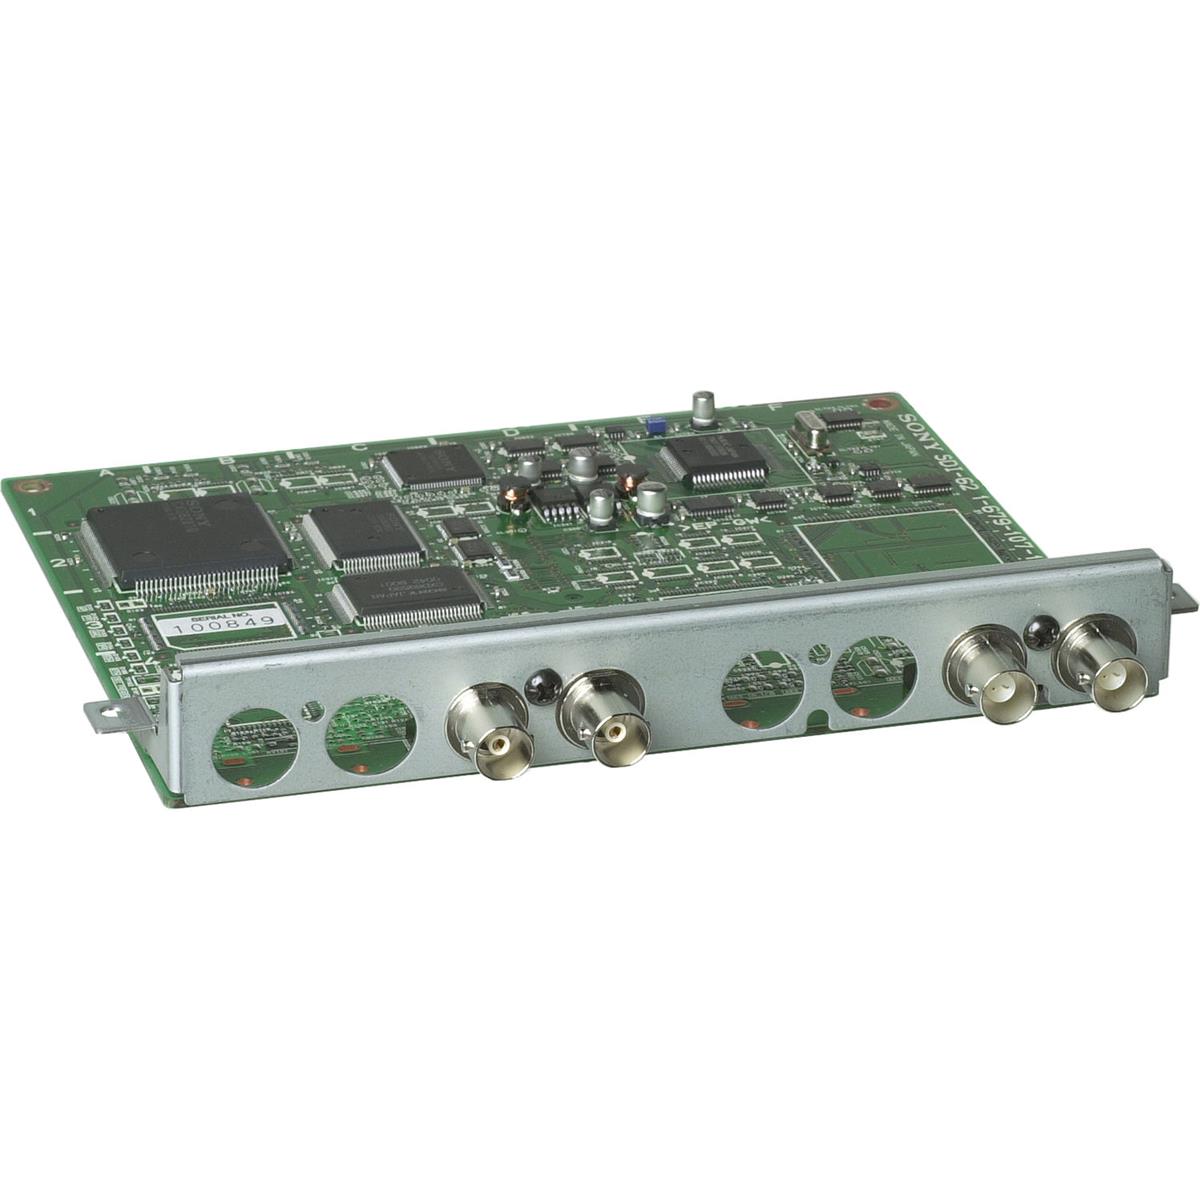 Image of Sony SDI/AES/EBU Output Interface Board for DSR-1600 DV-CAM Player VCR